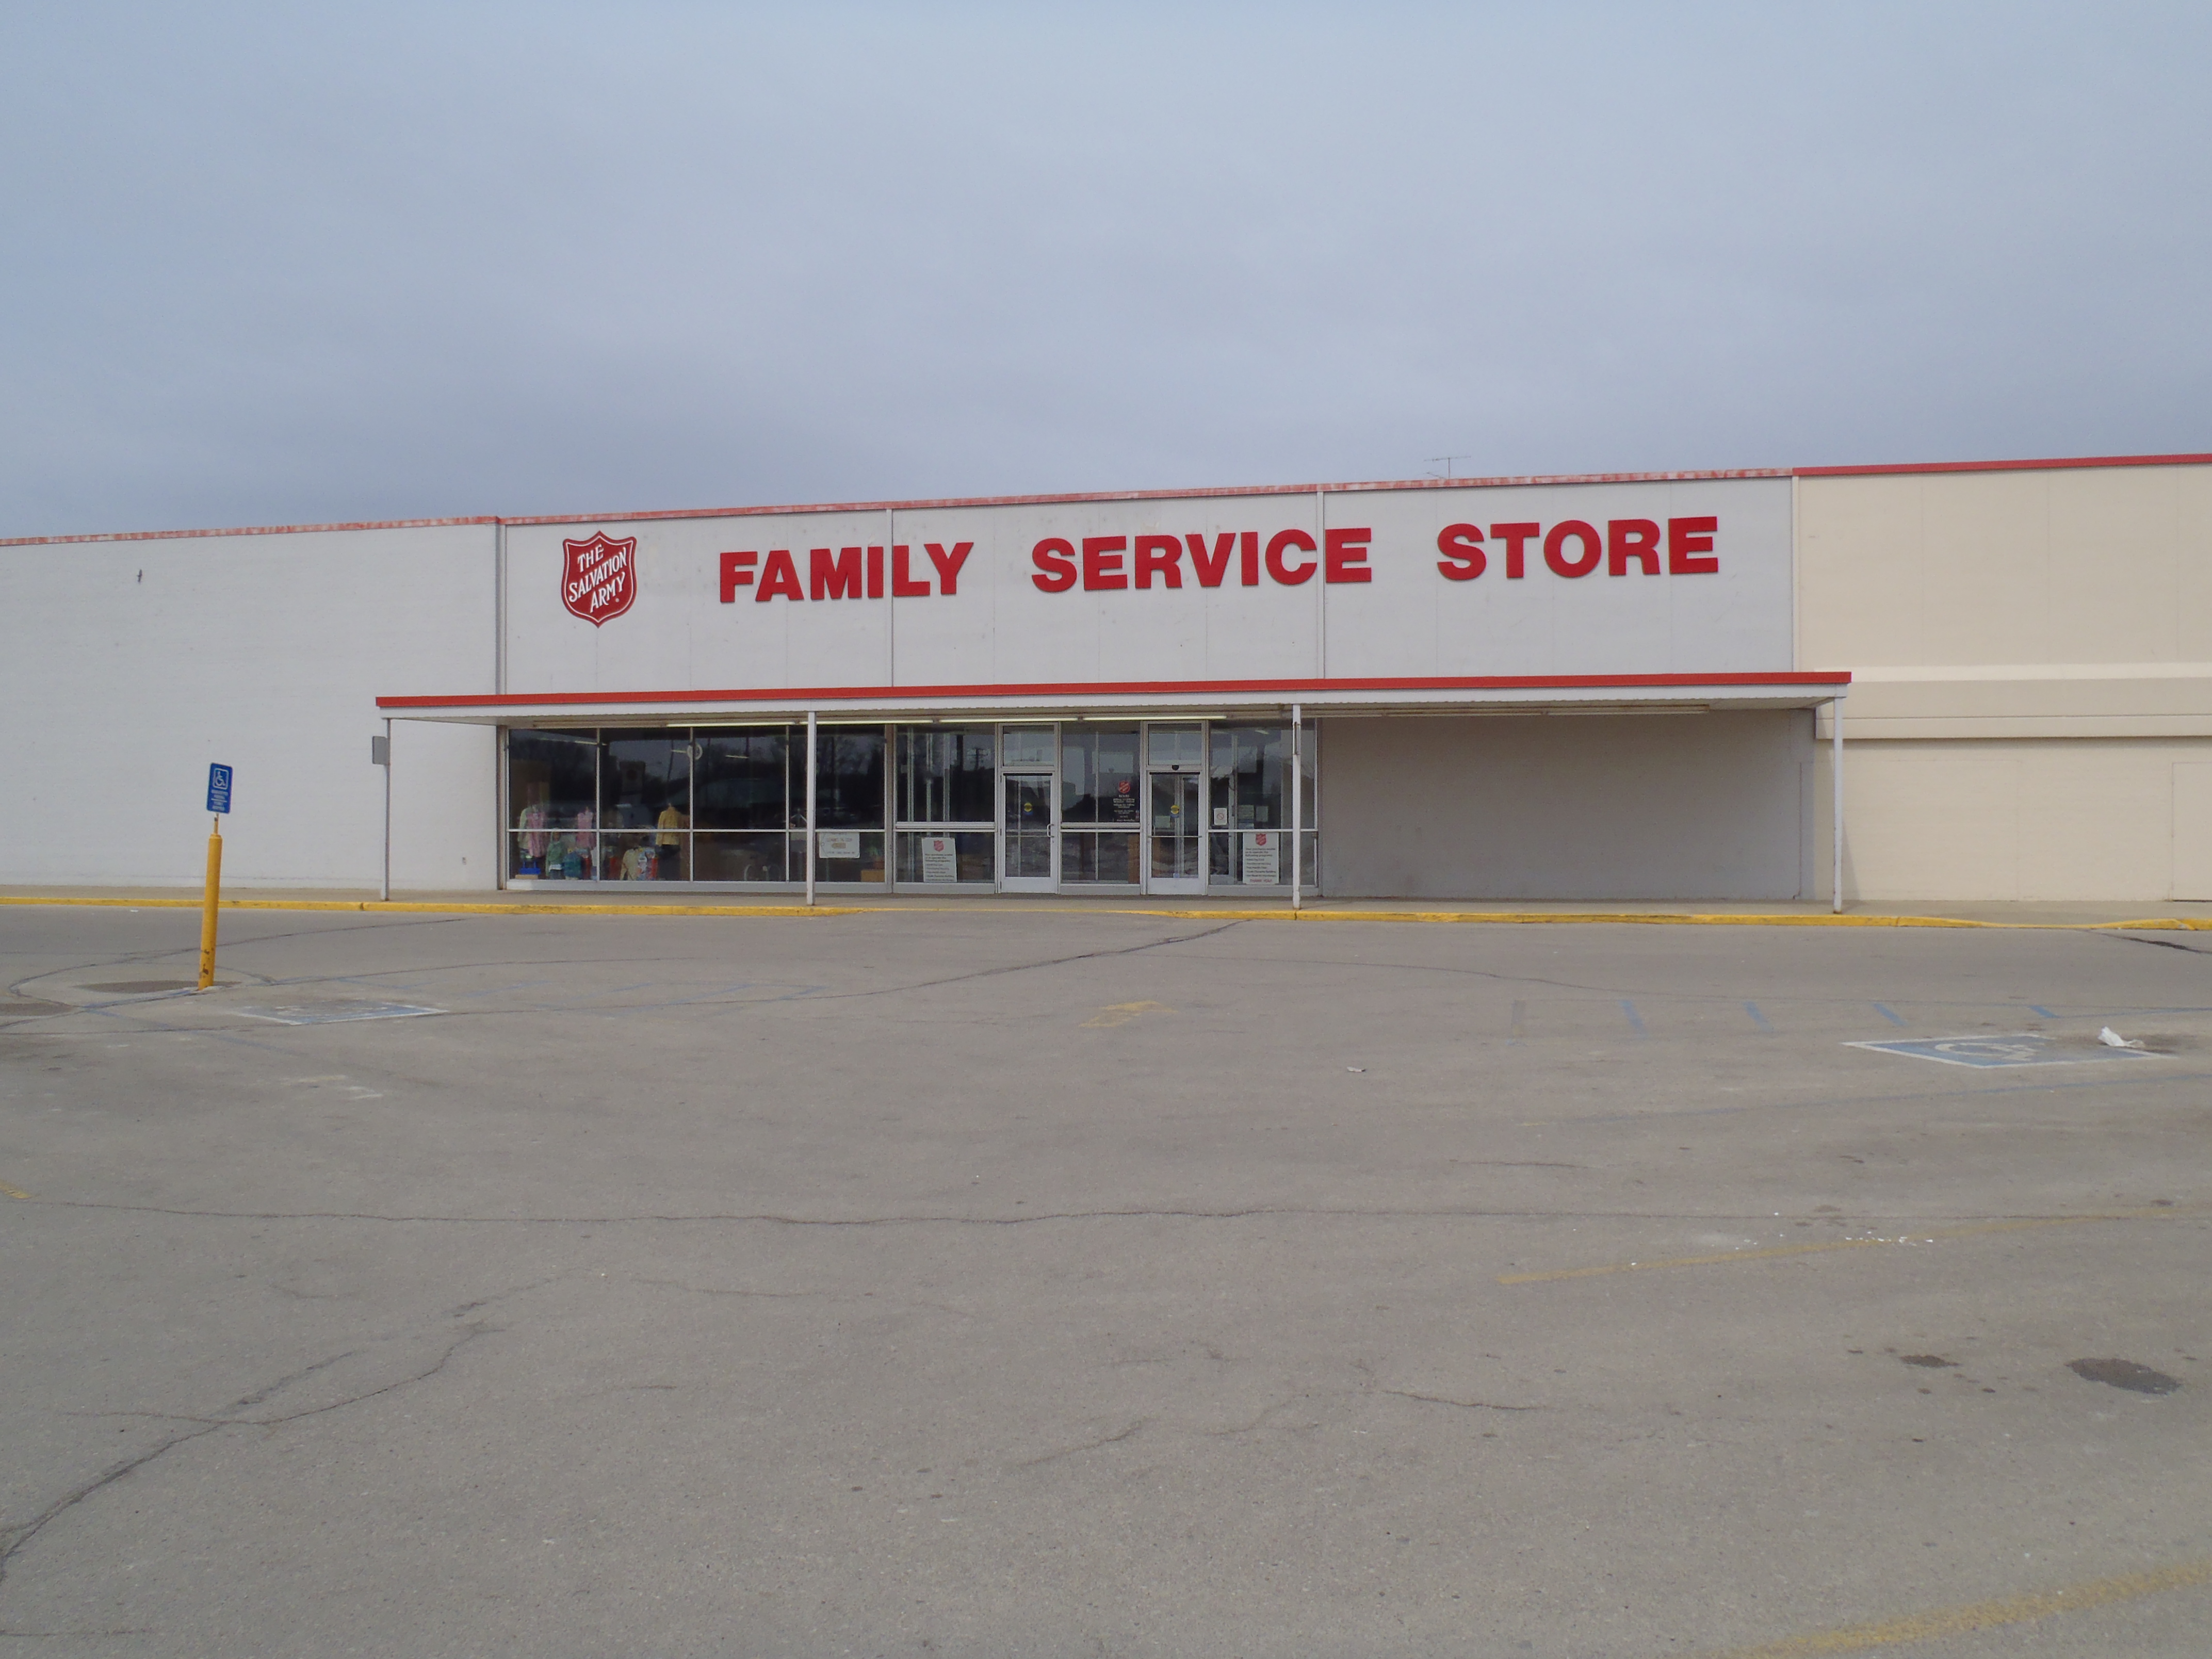 Salvation Army Family Service Store Rochester, MN. Image